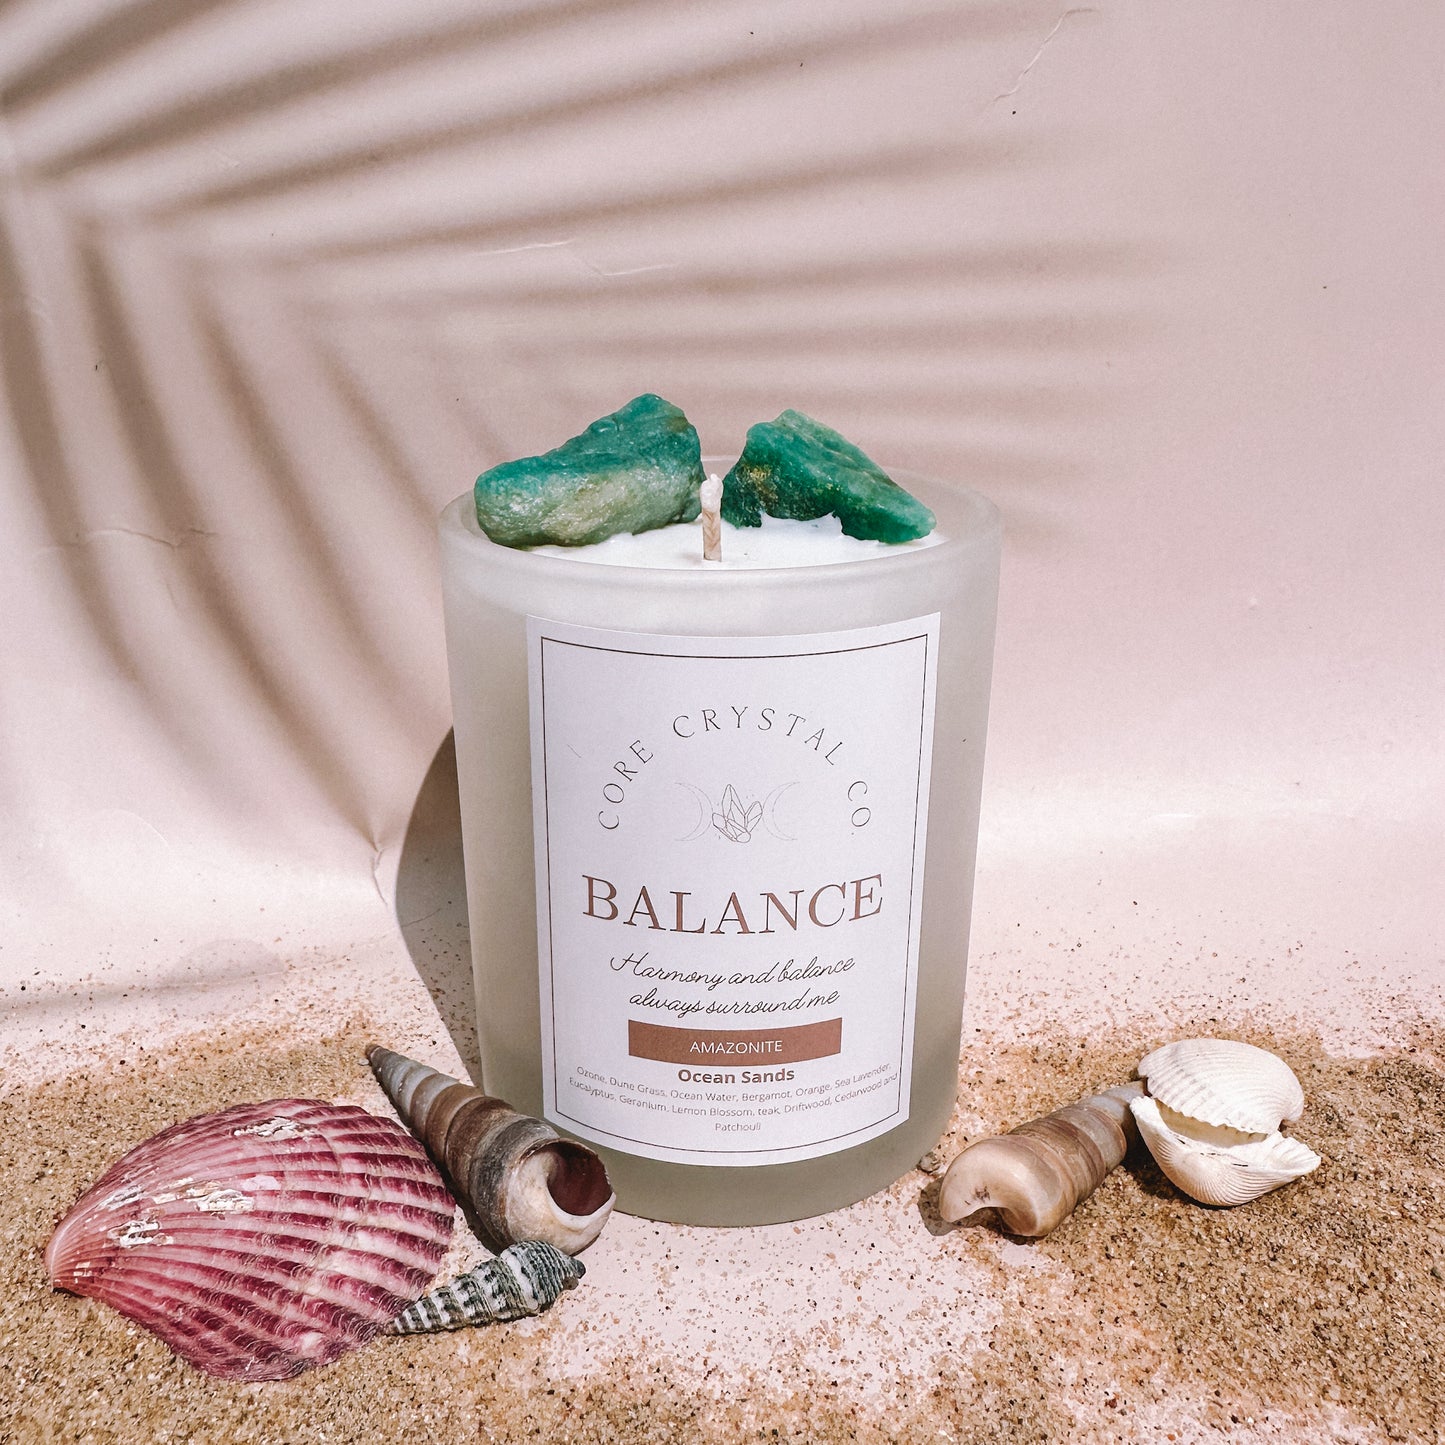 BALANCE Ocean Sands Amazonite Crystal Infused Candle